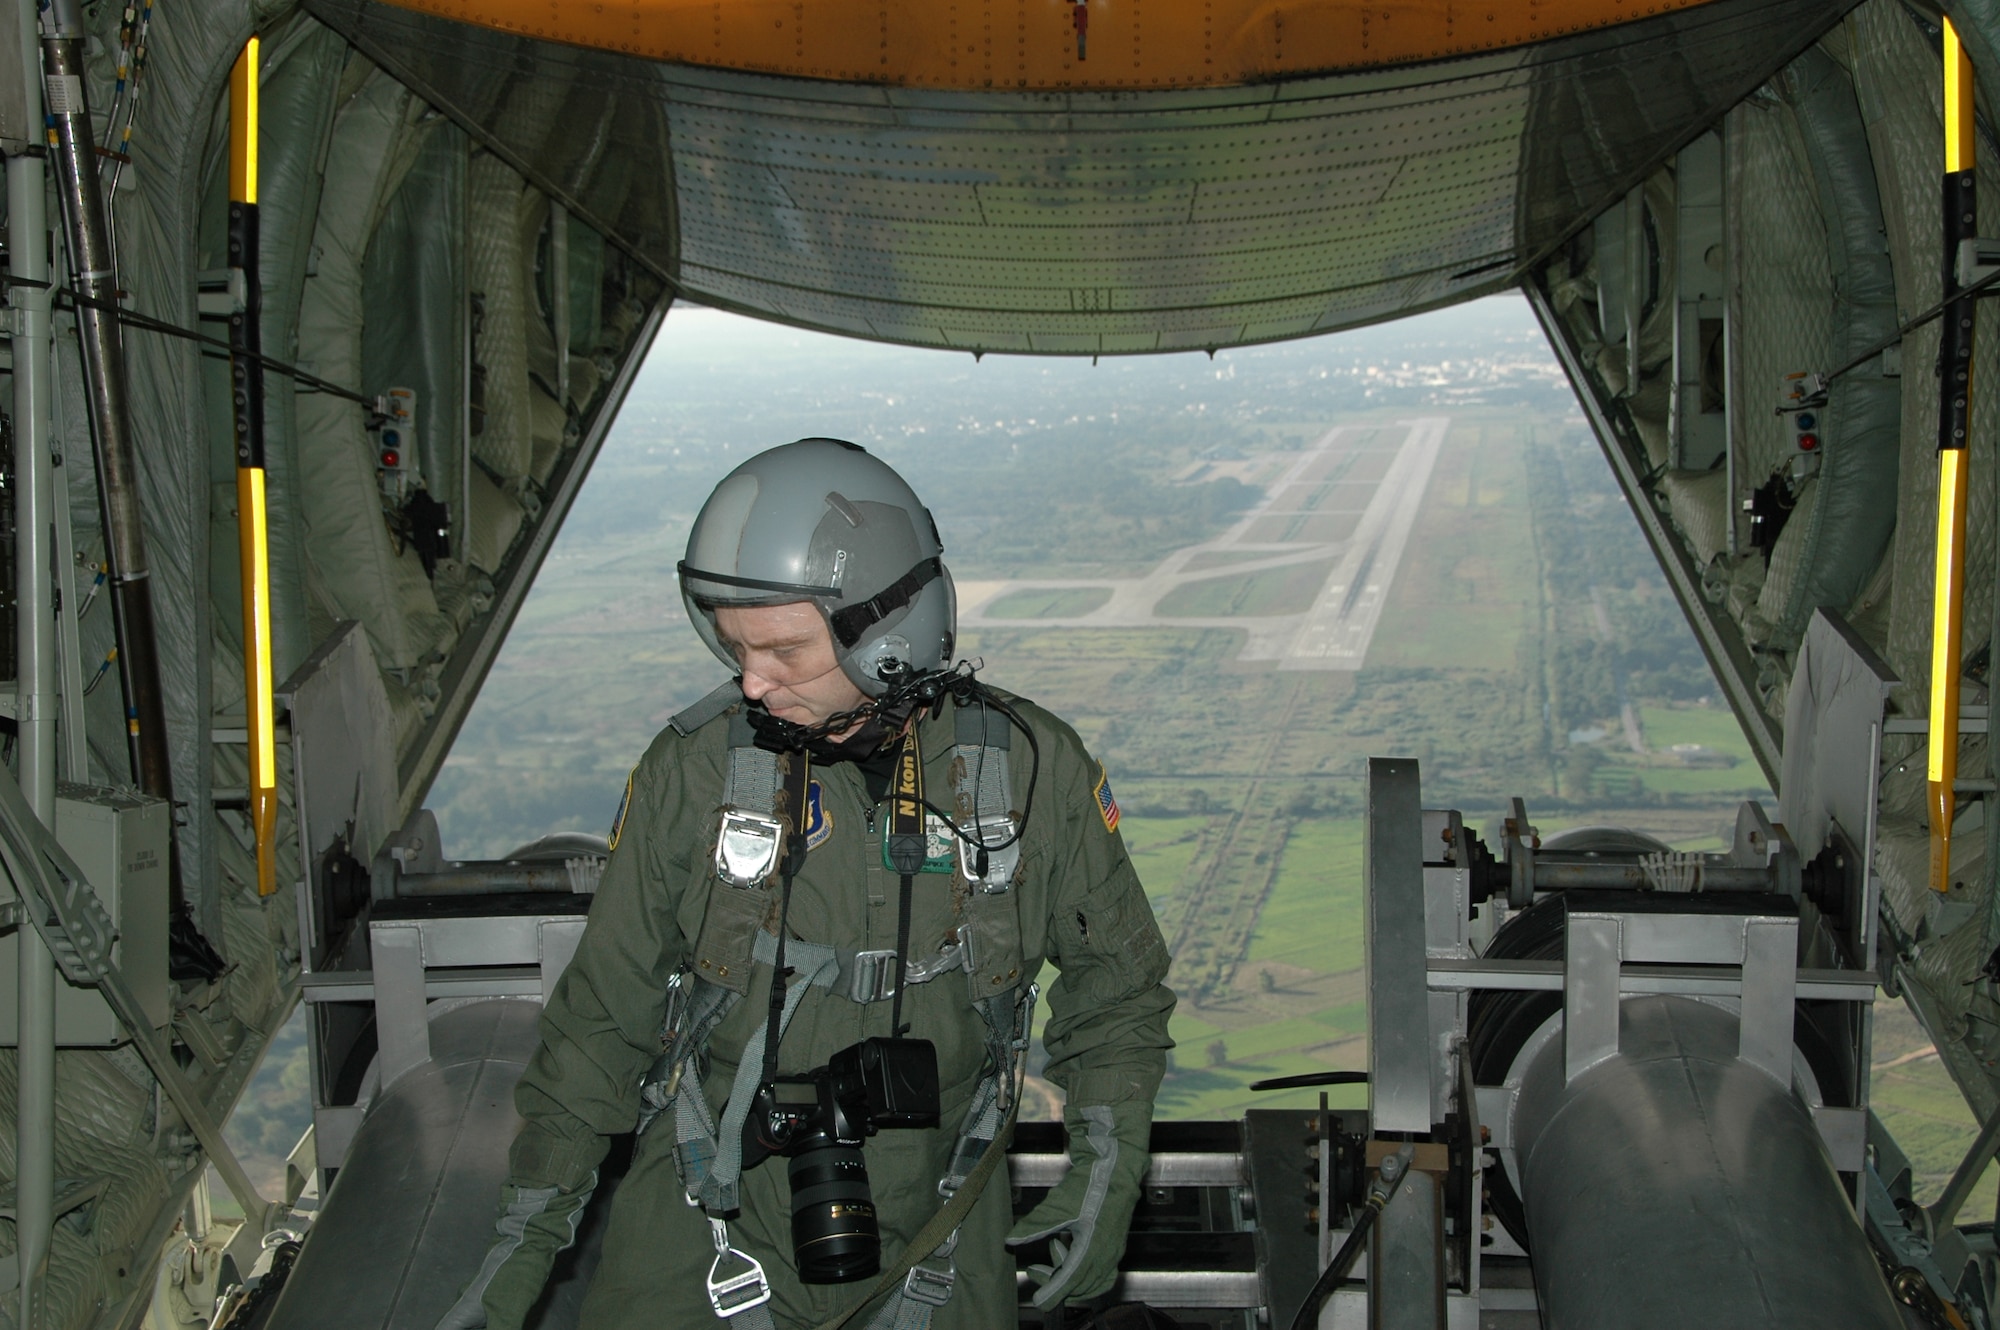 Chief Master Sgt. James D. Riley, chief loadmaster with the Air Force Reserve’s 302nd Airlift Wing prepares to pull in the Modular Airborne Firefighting System tubes after take-off from the Phitsanulok Royal Thai Air Force Base, Thailand.   Seven members of the Air Force Reserve’s 302 AW, based at Peterson AFB, Colo. were in Thailand providing expert training to RTAF members on safe and effective C-130 MAFFS operations.  This event marks the first time the Air Force Reserve has sent delegates to train a foreign Air Force on use of the MAFFS equipment. (U.S. Air Force photo/Capt. Jody L. Ritchie)